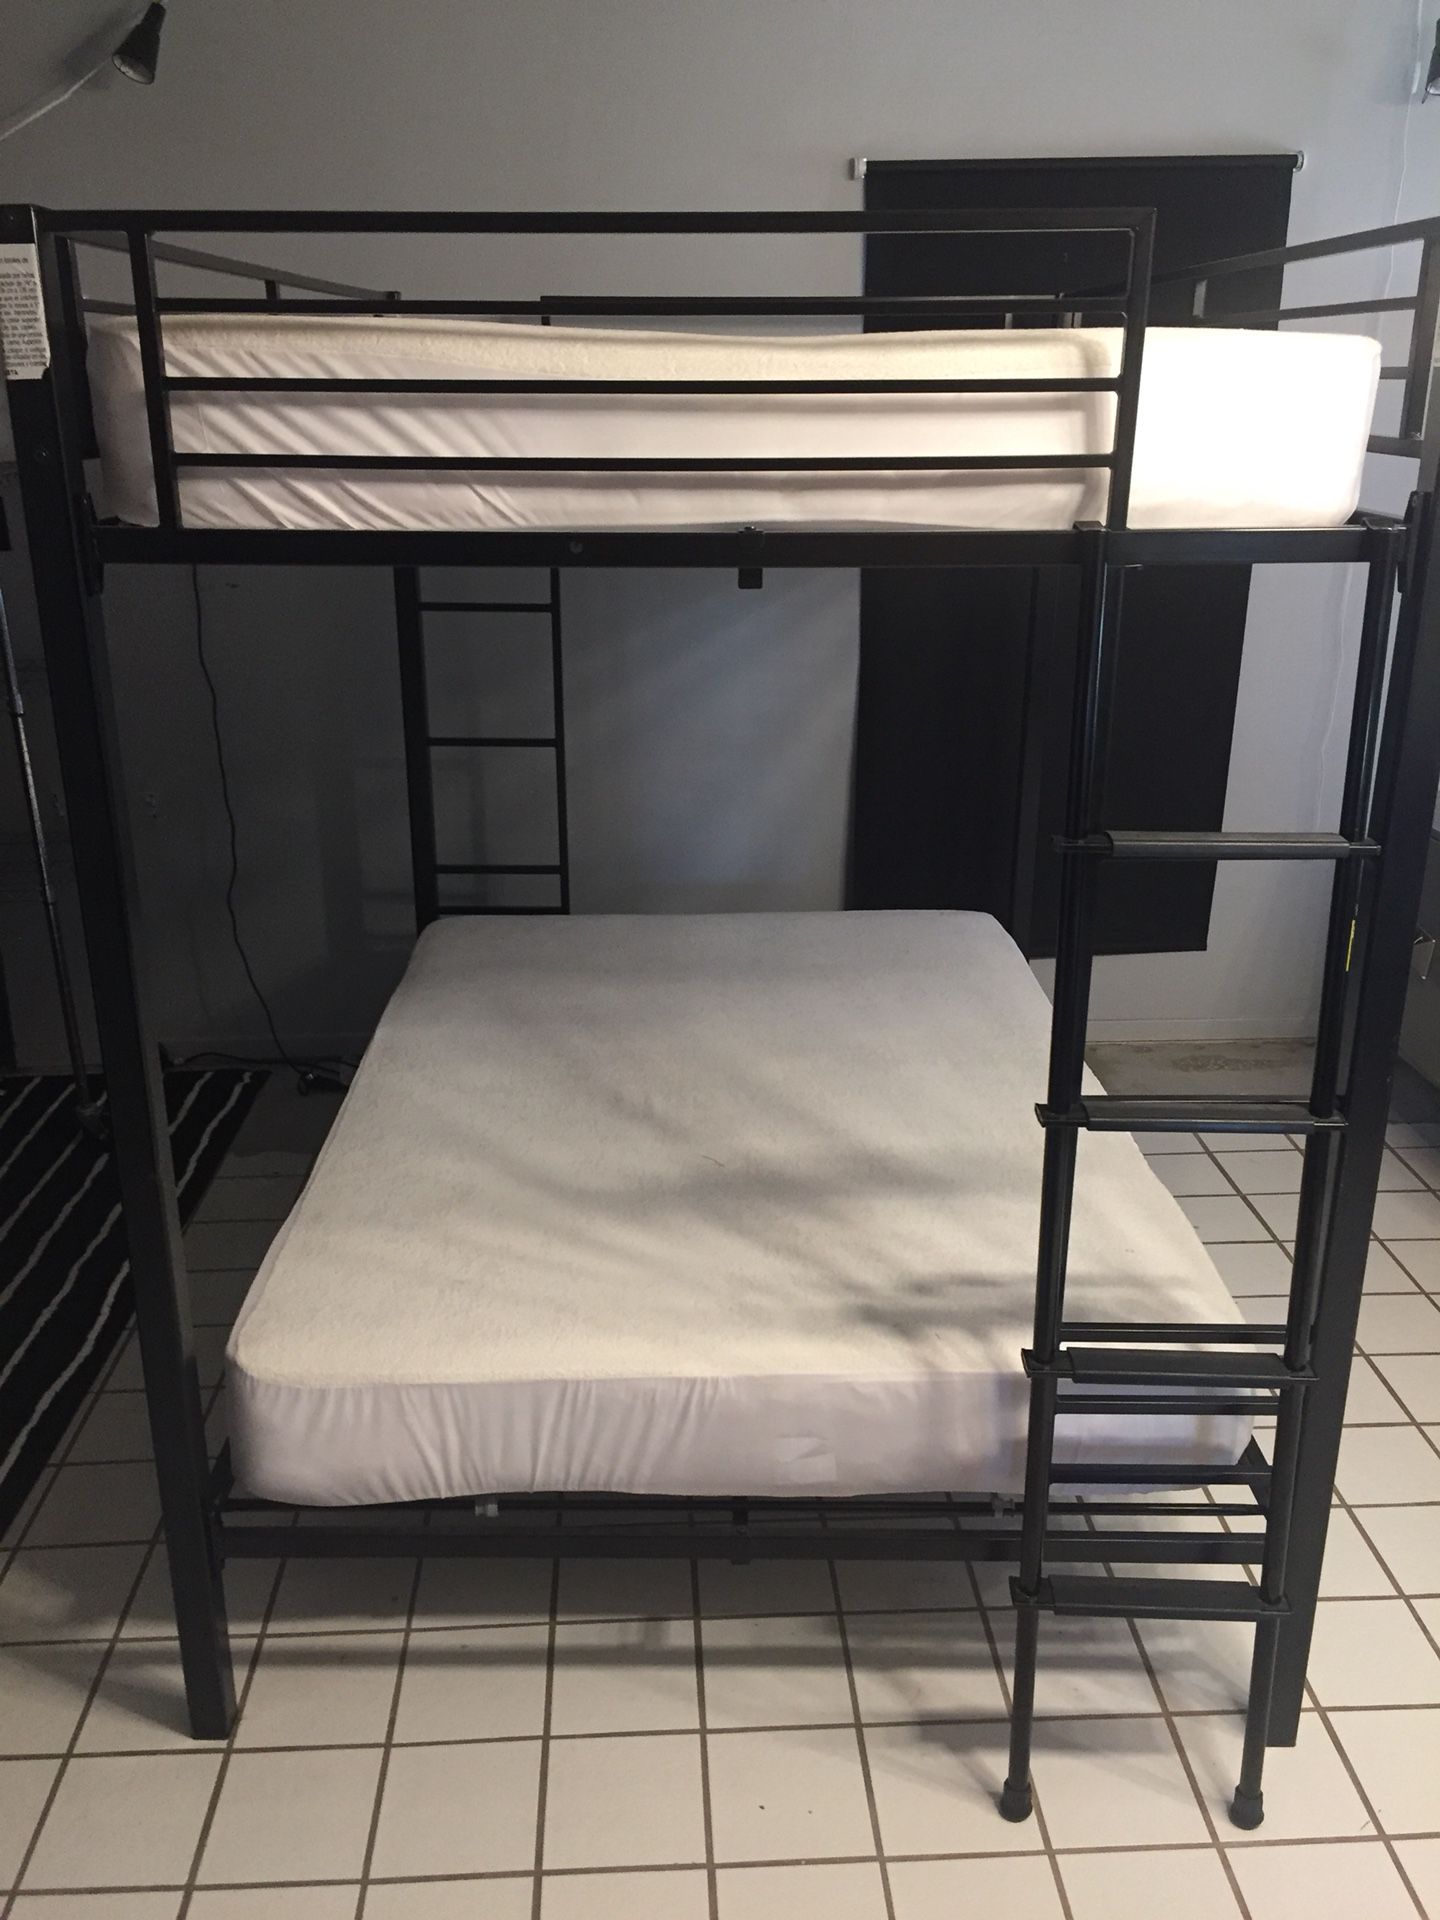 Full size Metal bunkbed (new mattress included)